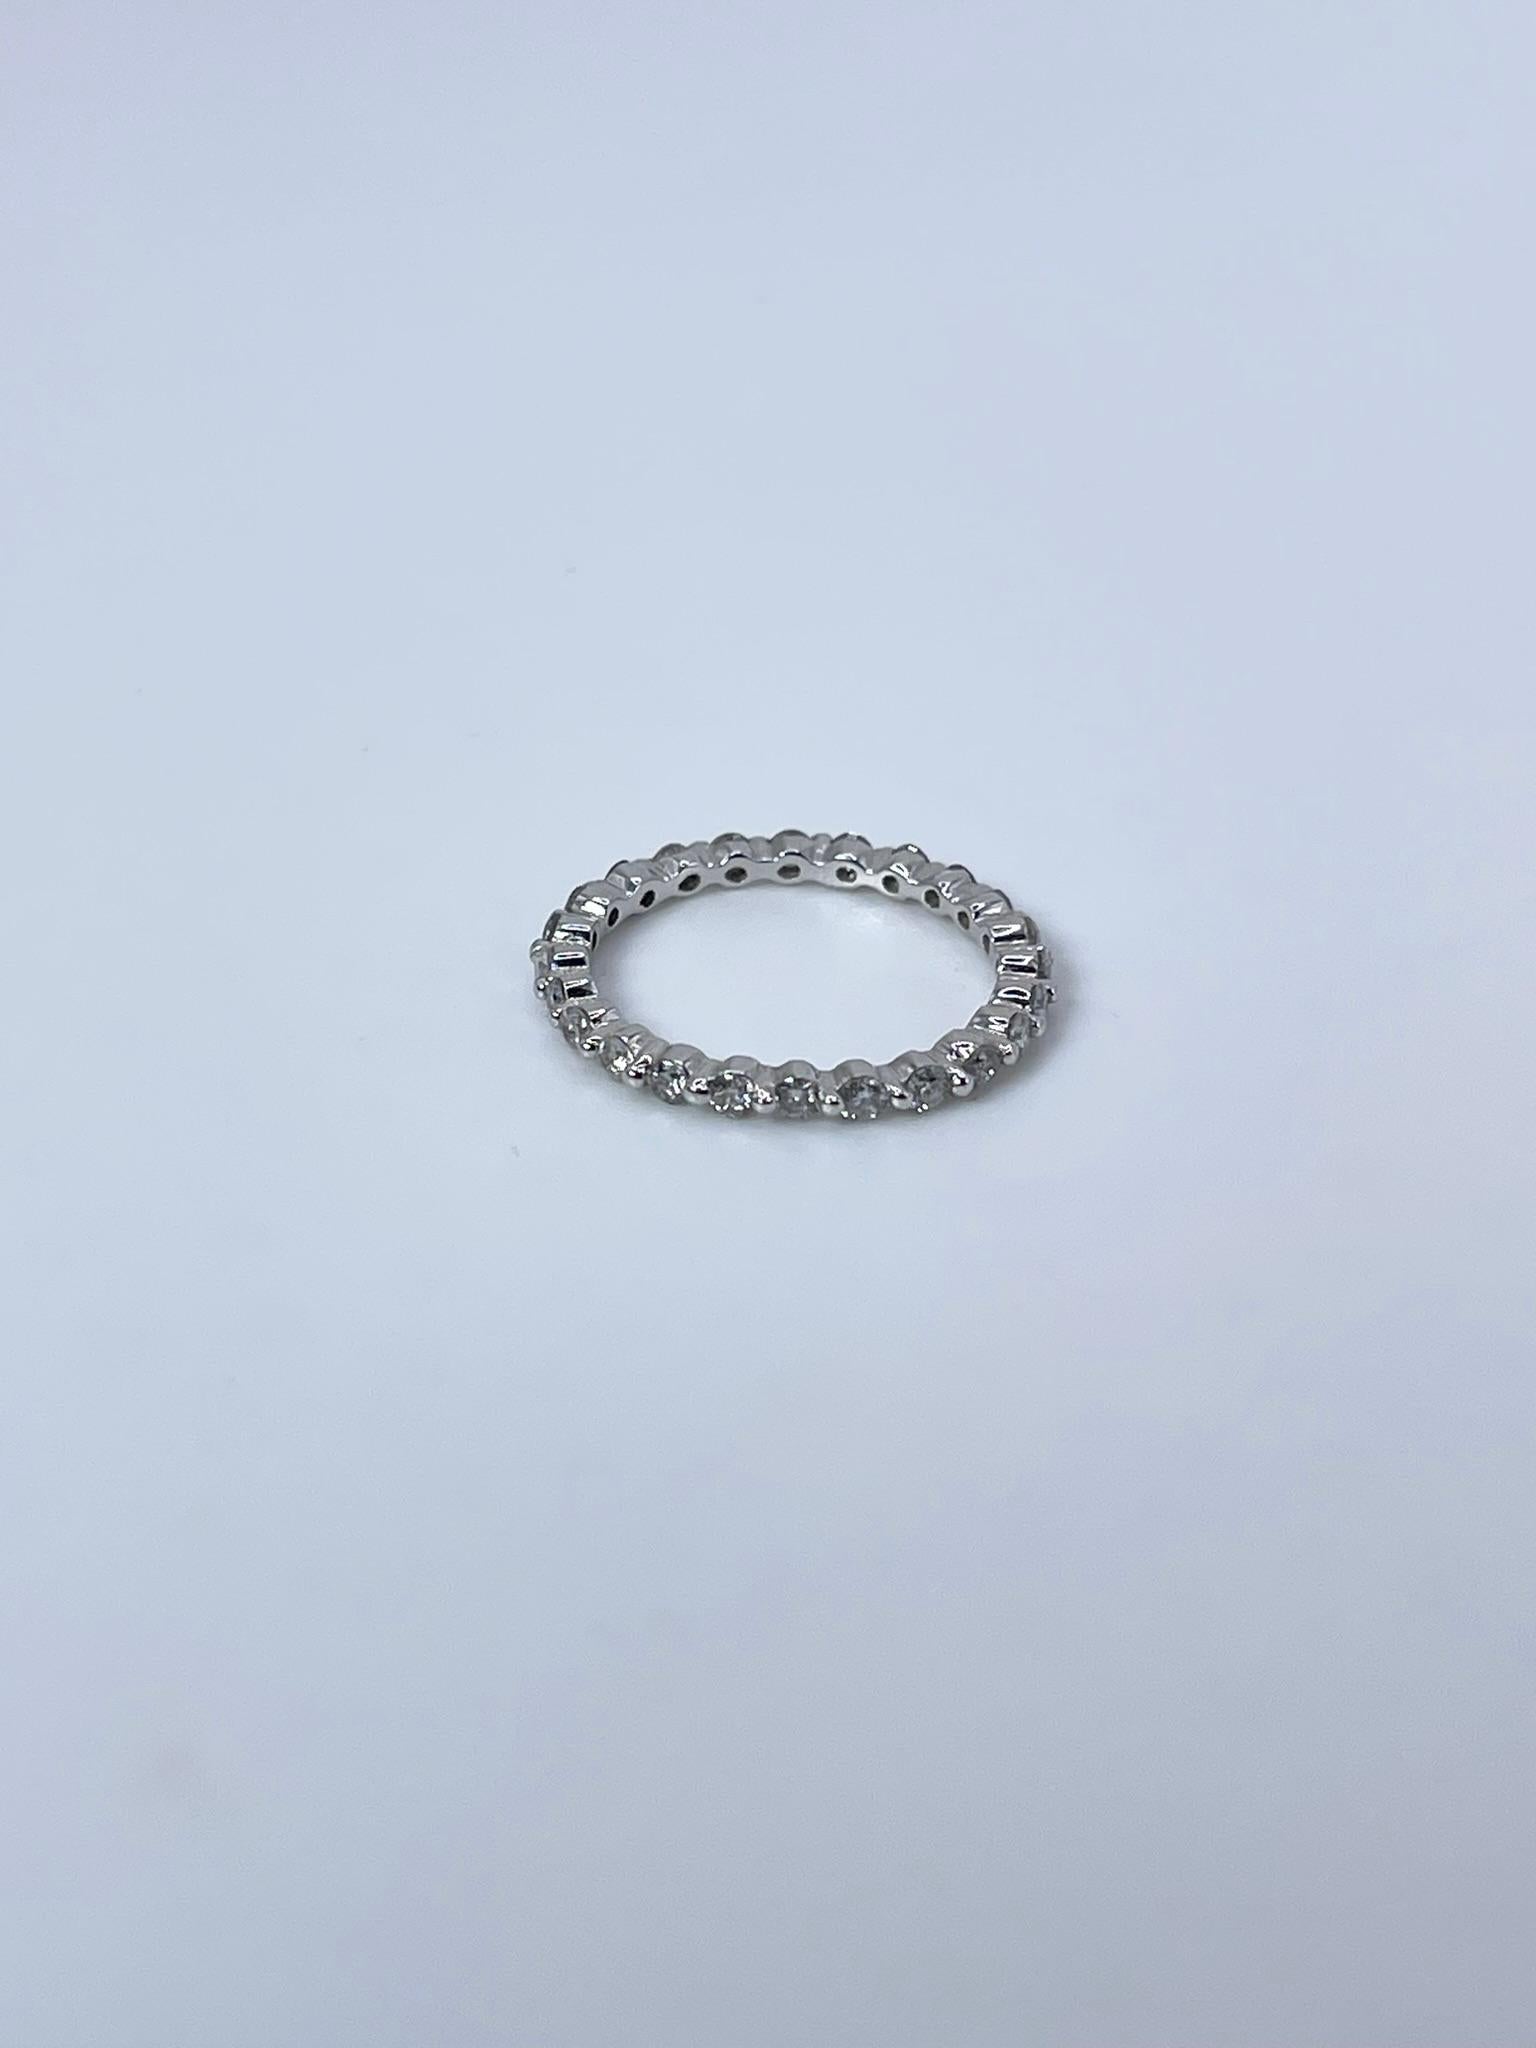 Diamond ring made eternity style, cannot be re-sized.
ITEM#: KEK120-00018
GRAM WEIGHT: 1.46gr
METAL: 18KT

NATURAL DIAMOND(S)
Cut: Round Brilliant
Color: G
Clarity: SI 
Carat: 0.59ct
Size: 5 ( cant be re-sized)


WHAT YOU GET AT STAMPAR